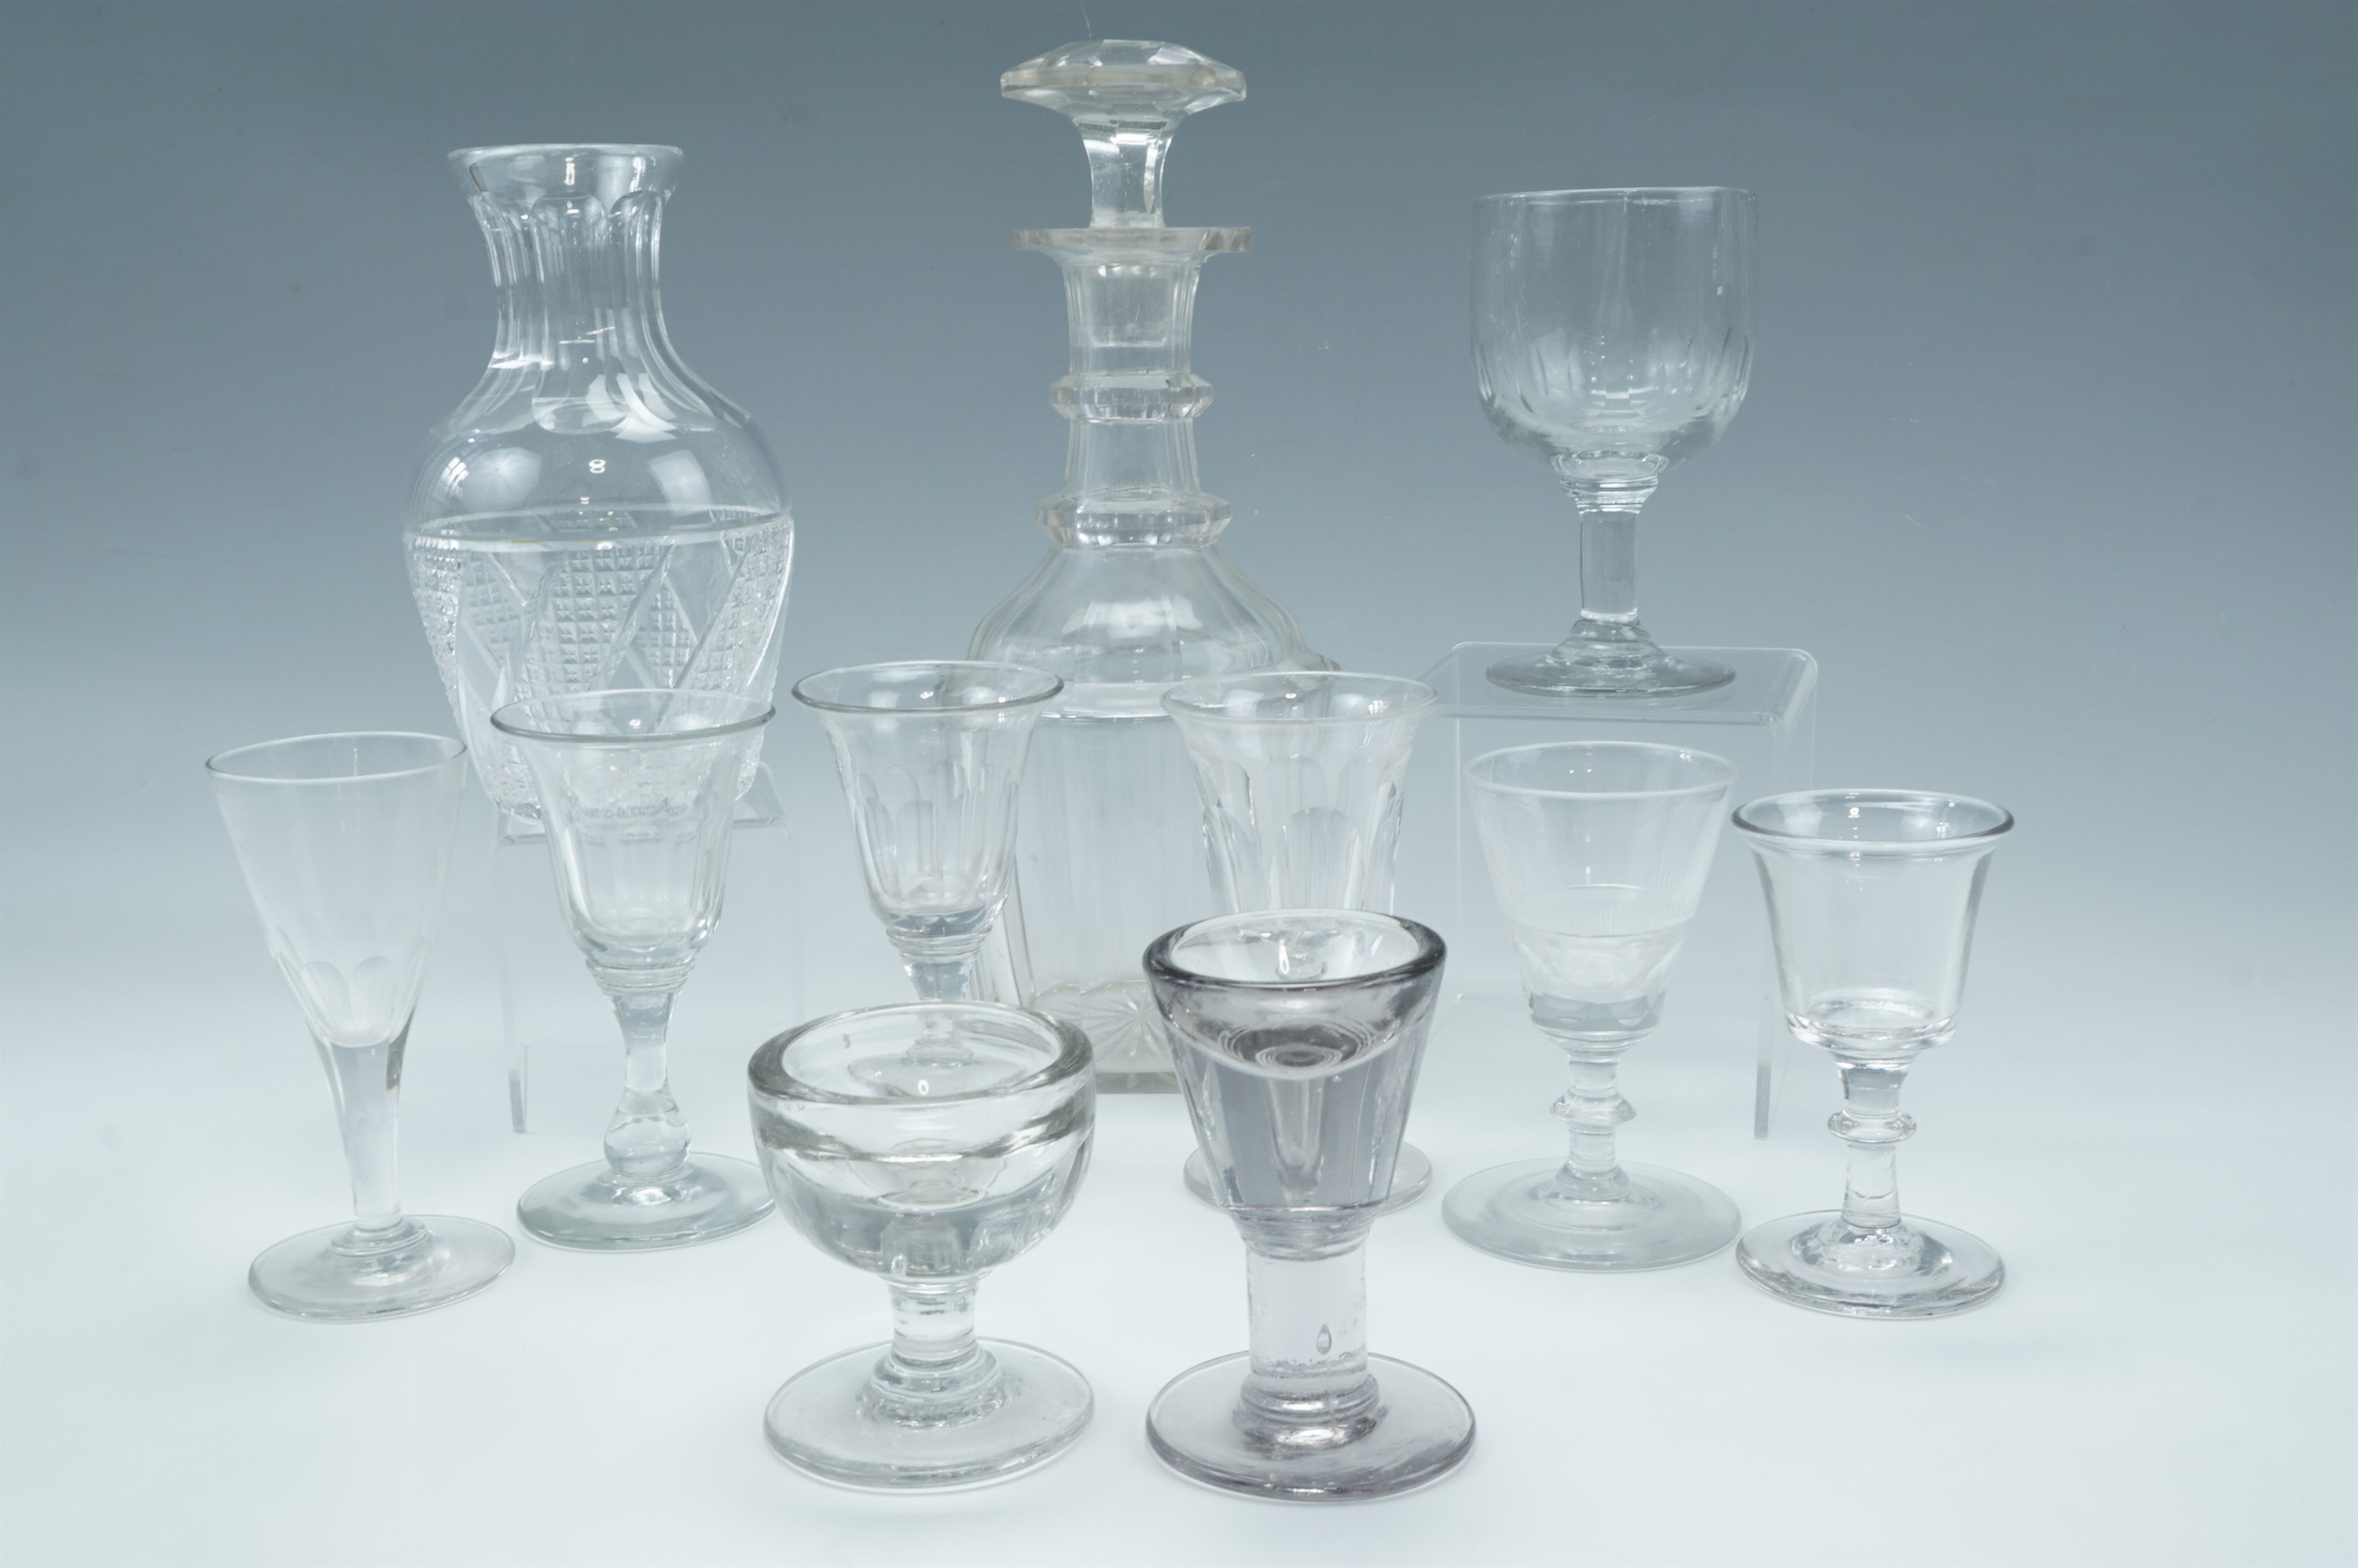 A William IV cut glass wine decanter together with a cut glass carafe and sundry 19th Century wine